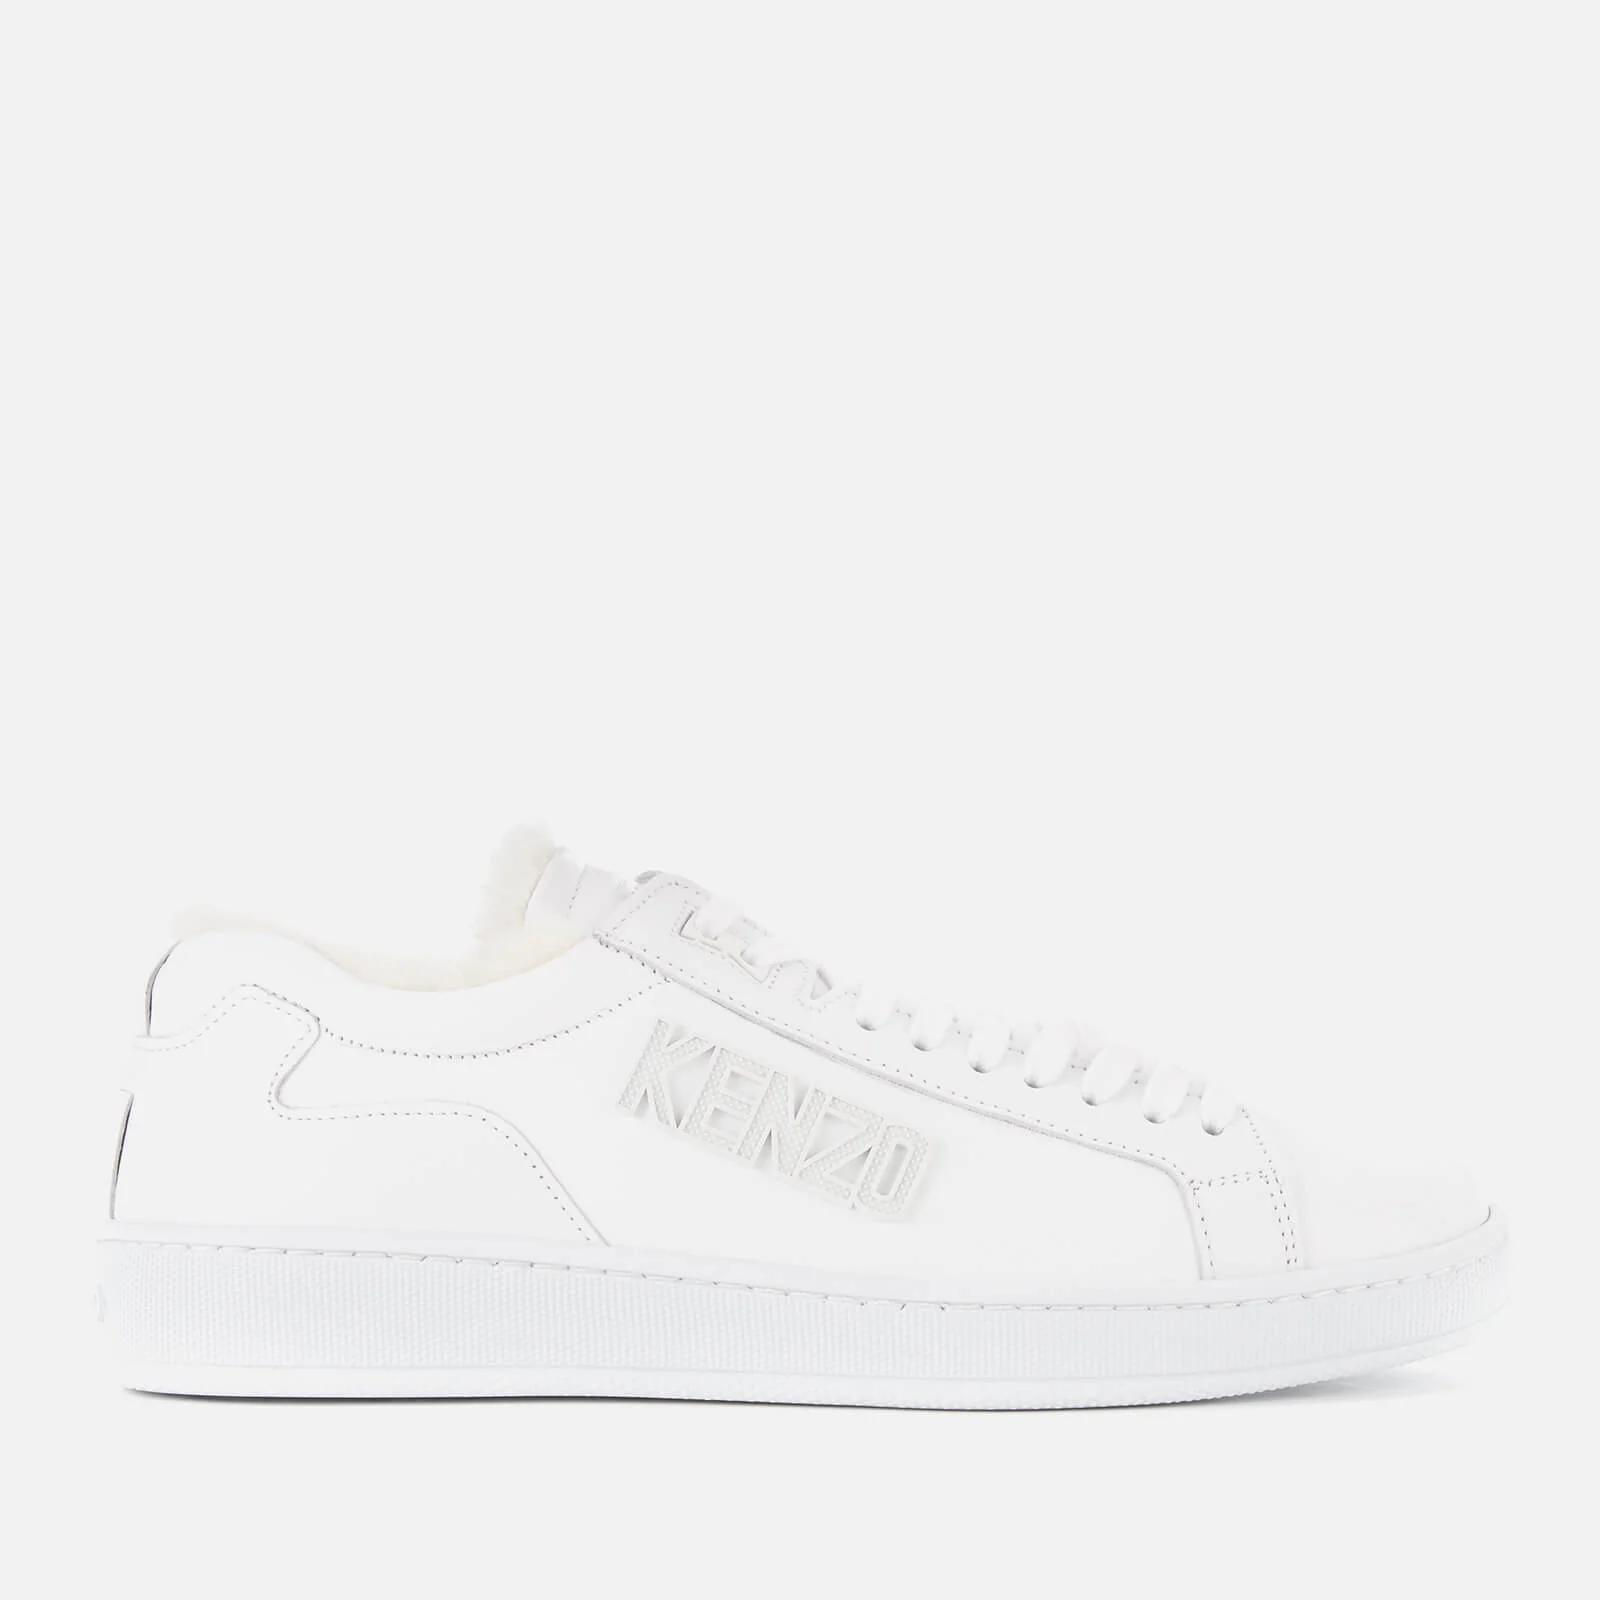 KENZO Women's Tennis Leather Cupsole Trainers - White Image 1